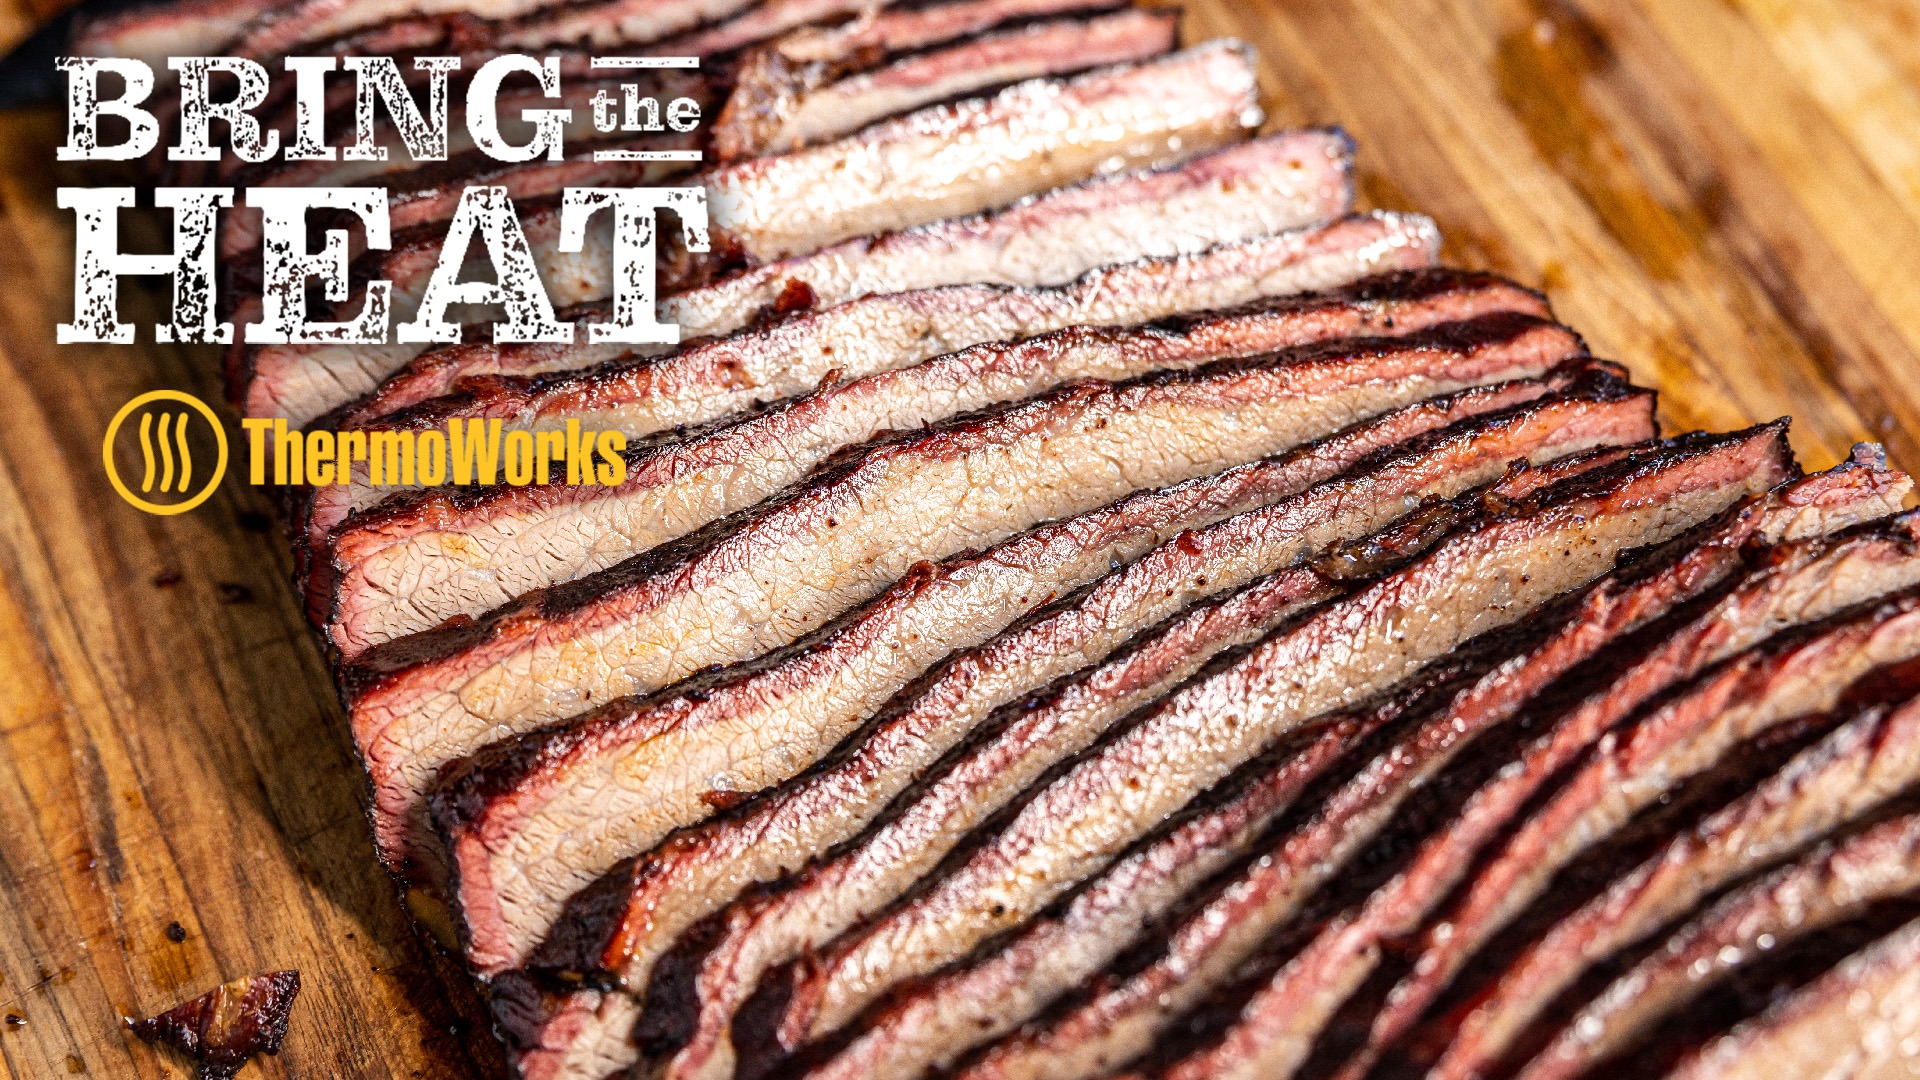 https://blog.thermoworks.com/wp-content/uploads/2021/07/bring-the-heat-video-thumb_brisket3.jpg